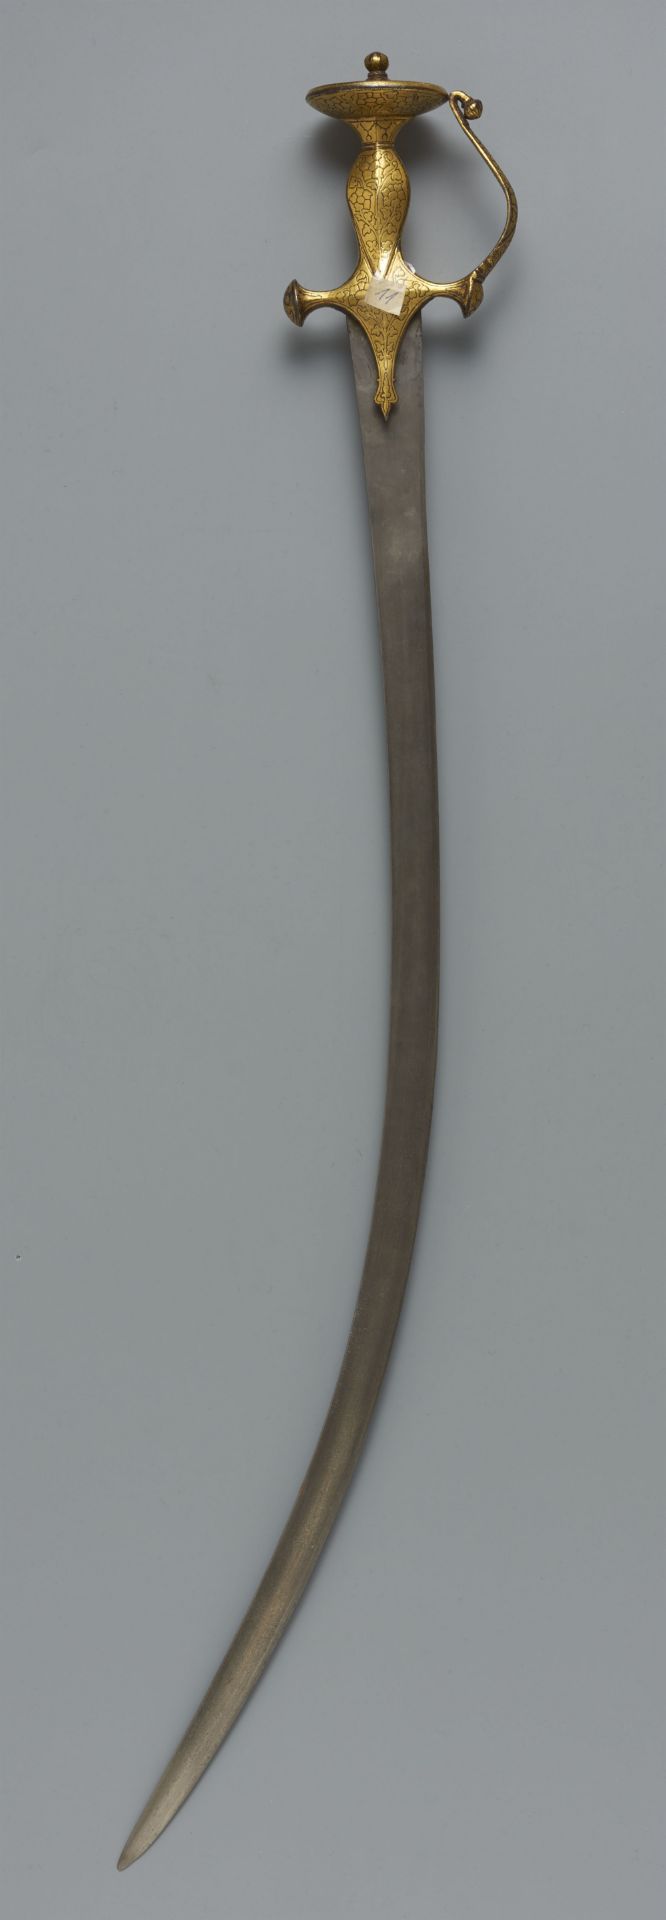 A North Indian Mughal sword (tulwar). 18th/19th century - Image 2 of 2